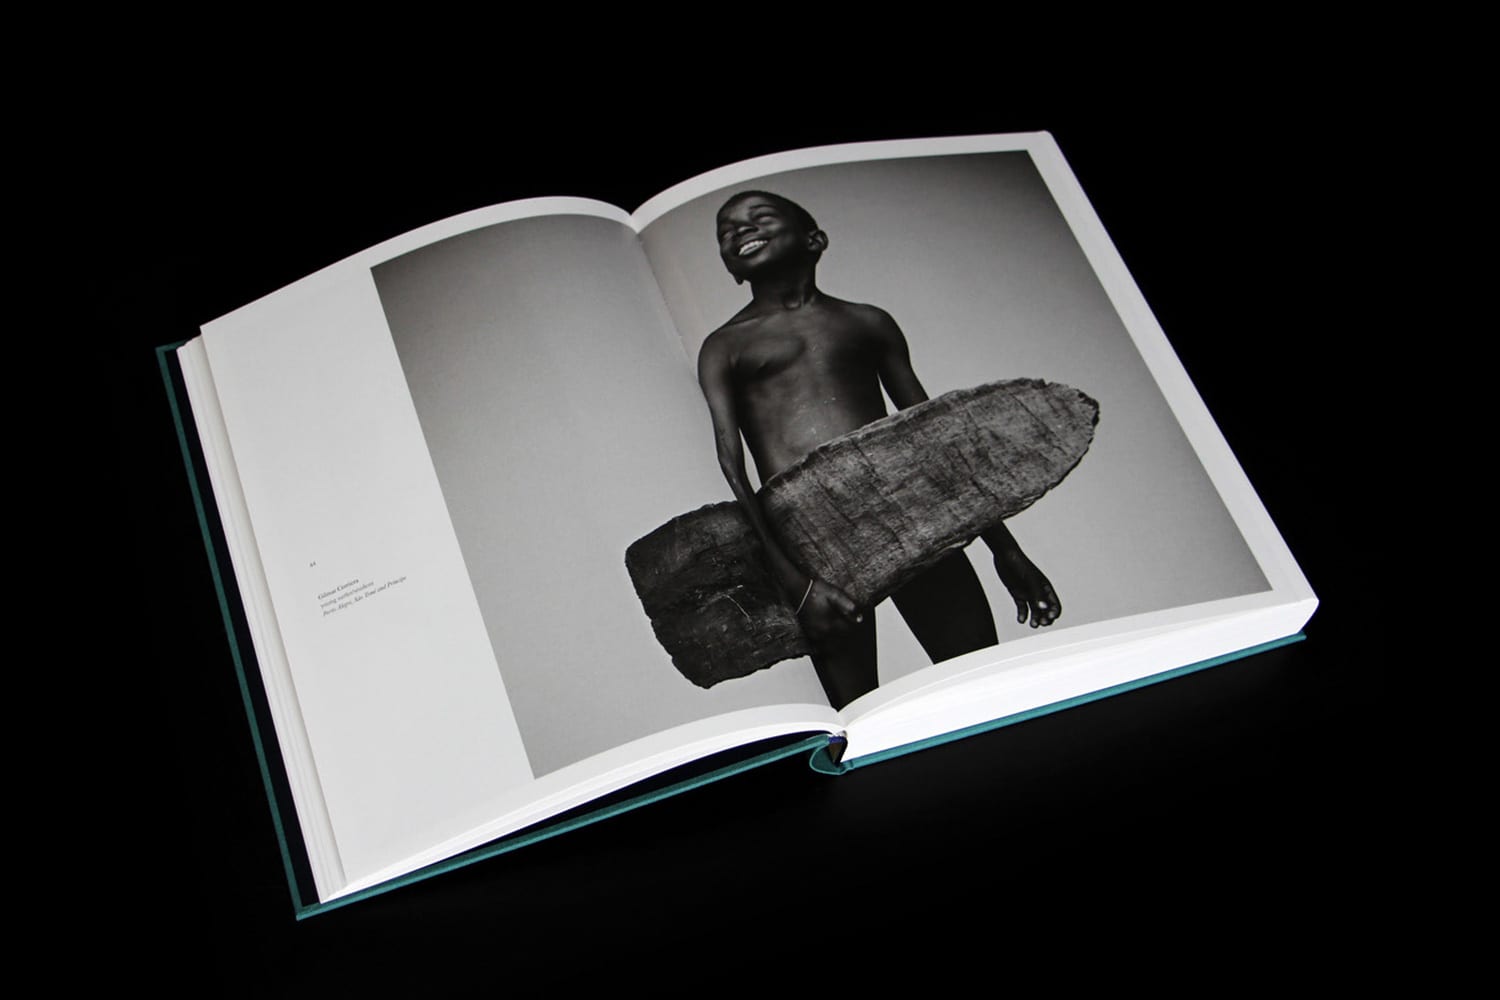 Swell: A Year of Waves (Ocean Coffee Table Book, Book About Surfing)